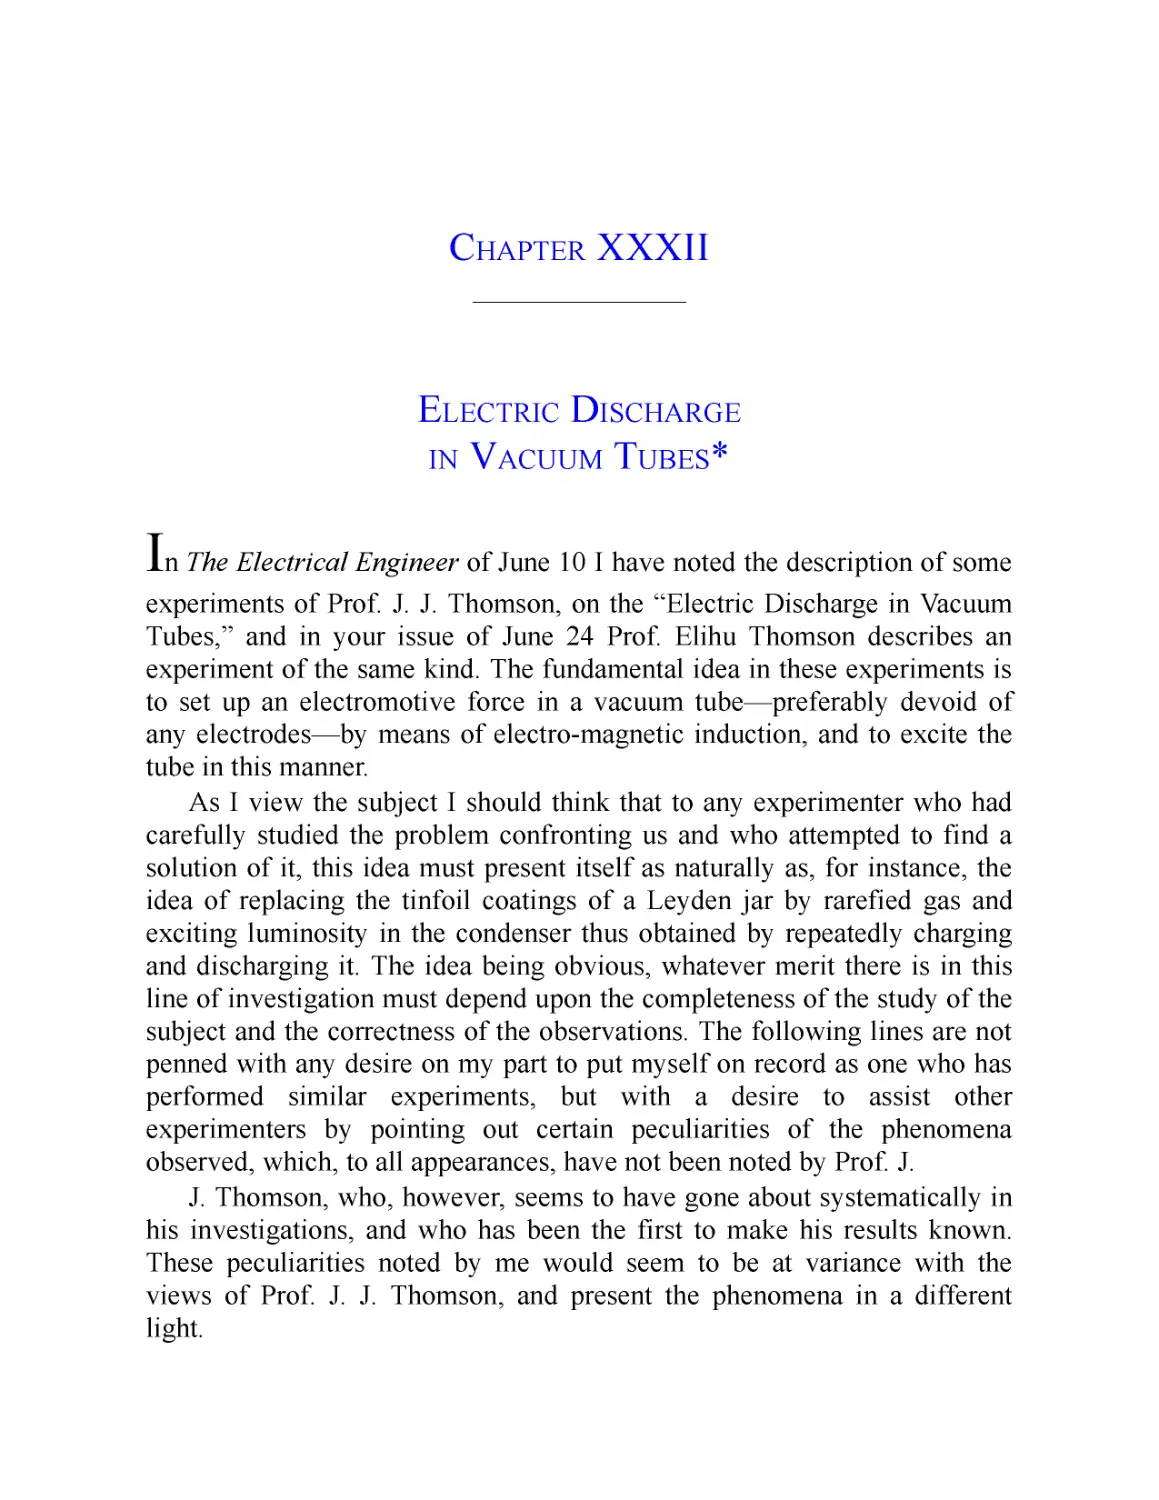 ﻿Chapter XXXII: Electric Discharge in Vacuum Tube